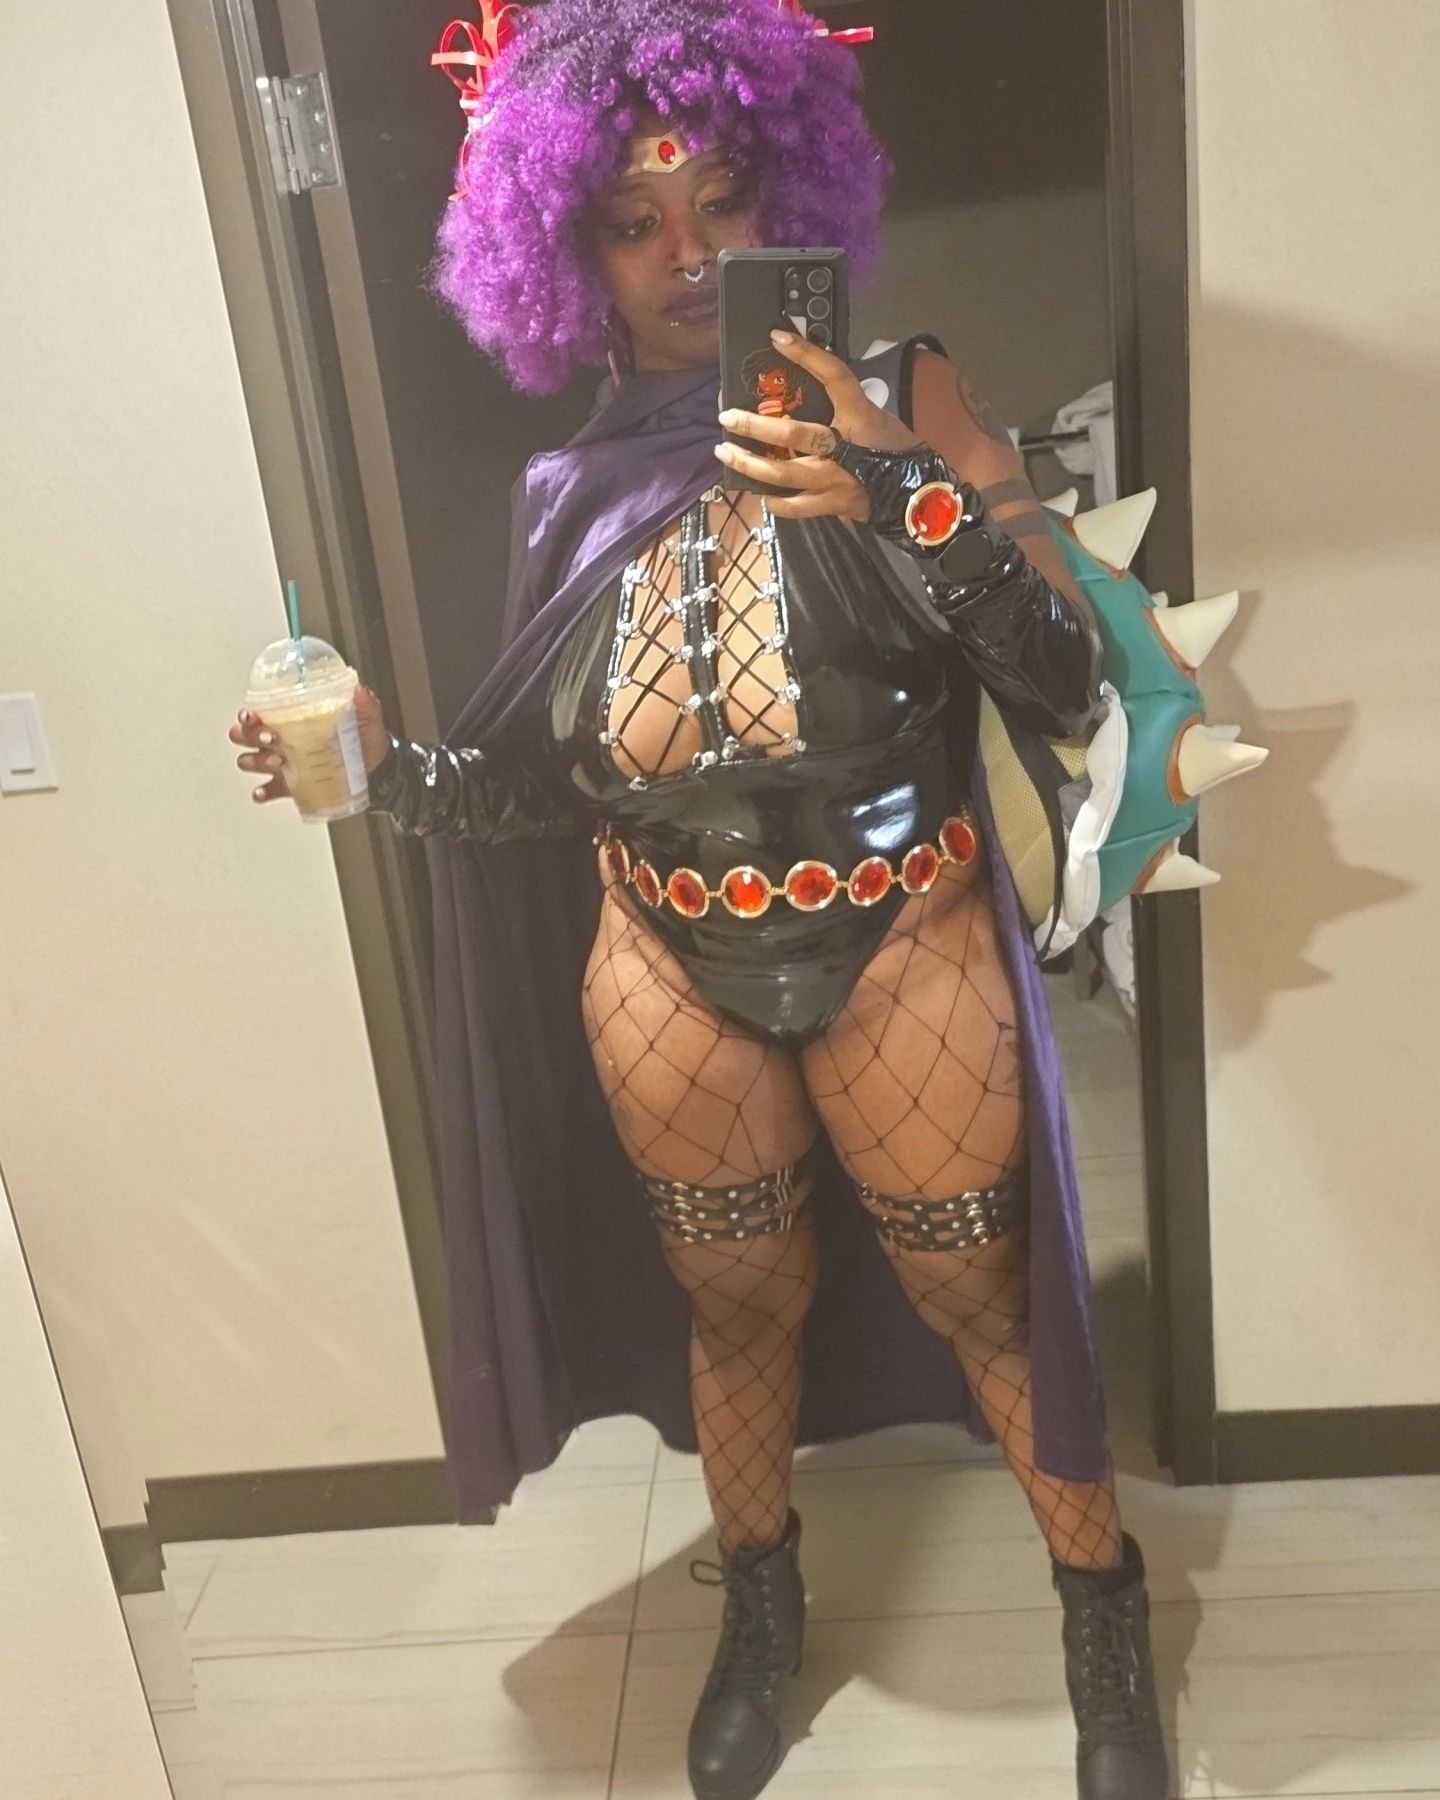 First time in Vegas & my first out of state con in one go?? Hell yeah! I enjoyed attending @tsumi.con 🖤 I'm also happy I got to see con friends, meet new friends, & meet idols too!🥰 ( More pics are coming soon ;) )
.
.
.
.
#raven #ravencosplay #teentitans #teentitanscosplay #dccosplay #dccomics #dcuniverse #tsumicon #confriends #vivalasvegas #bowsette #bowsettecosplay #friendship #goodvibes #protect #waifus #cosplaybabe #blackcosplayers #goth